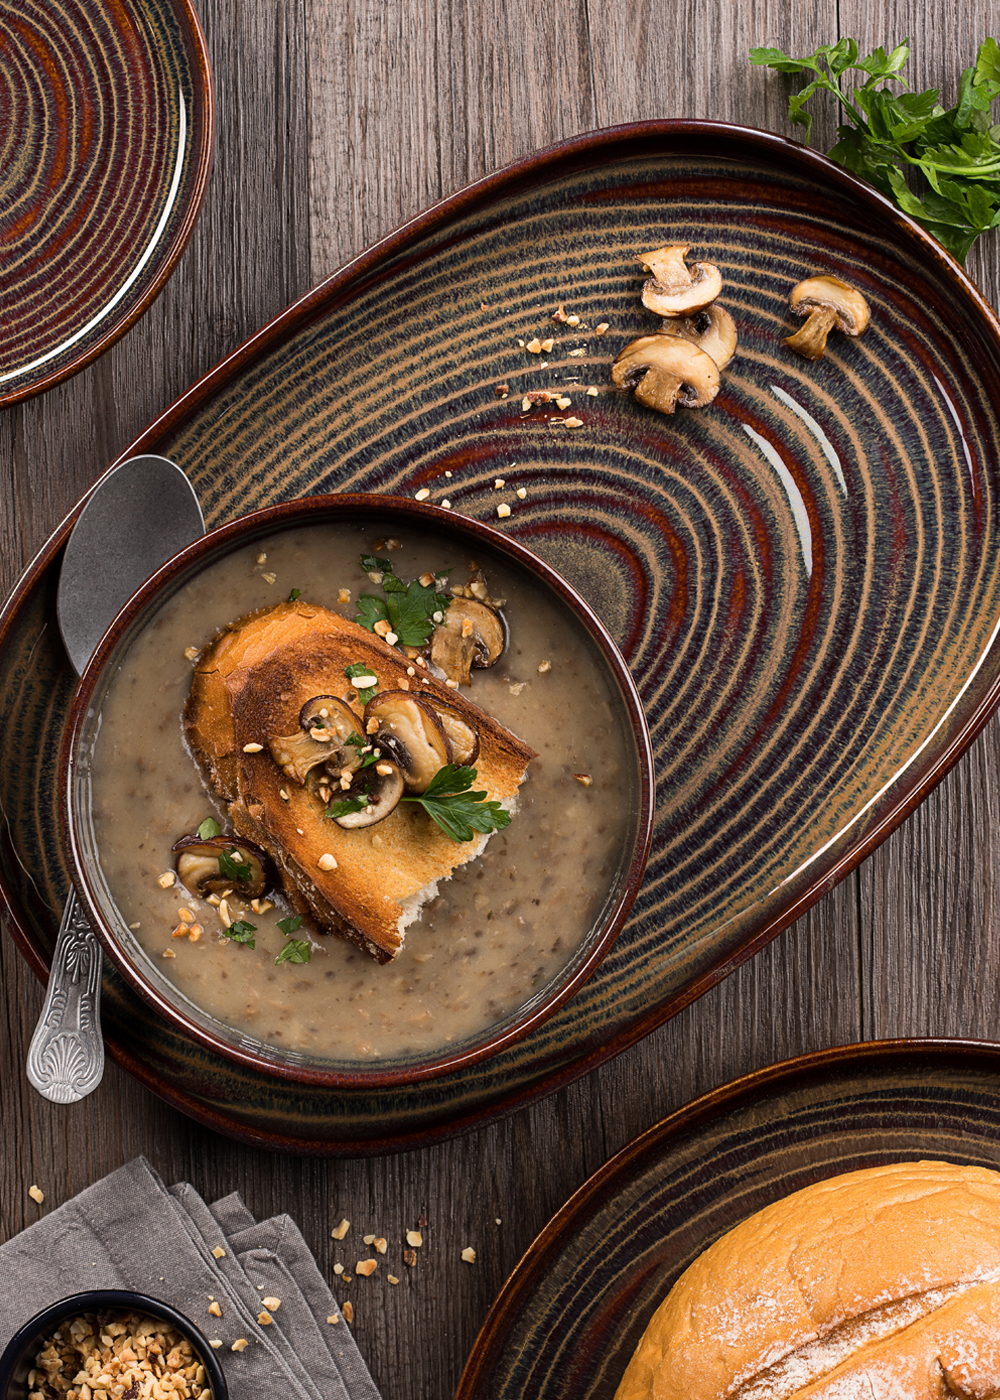 Circles within circles: Santo collection brings focus to the tabletop